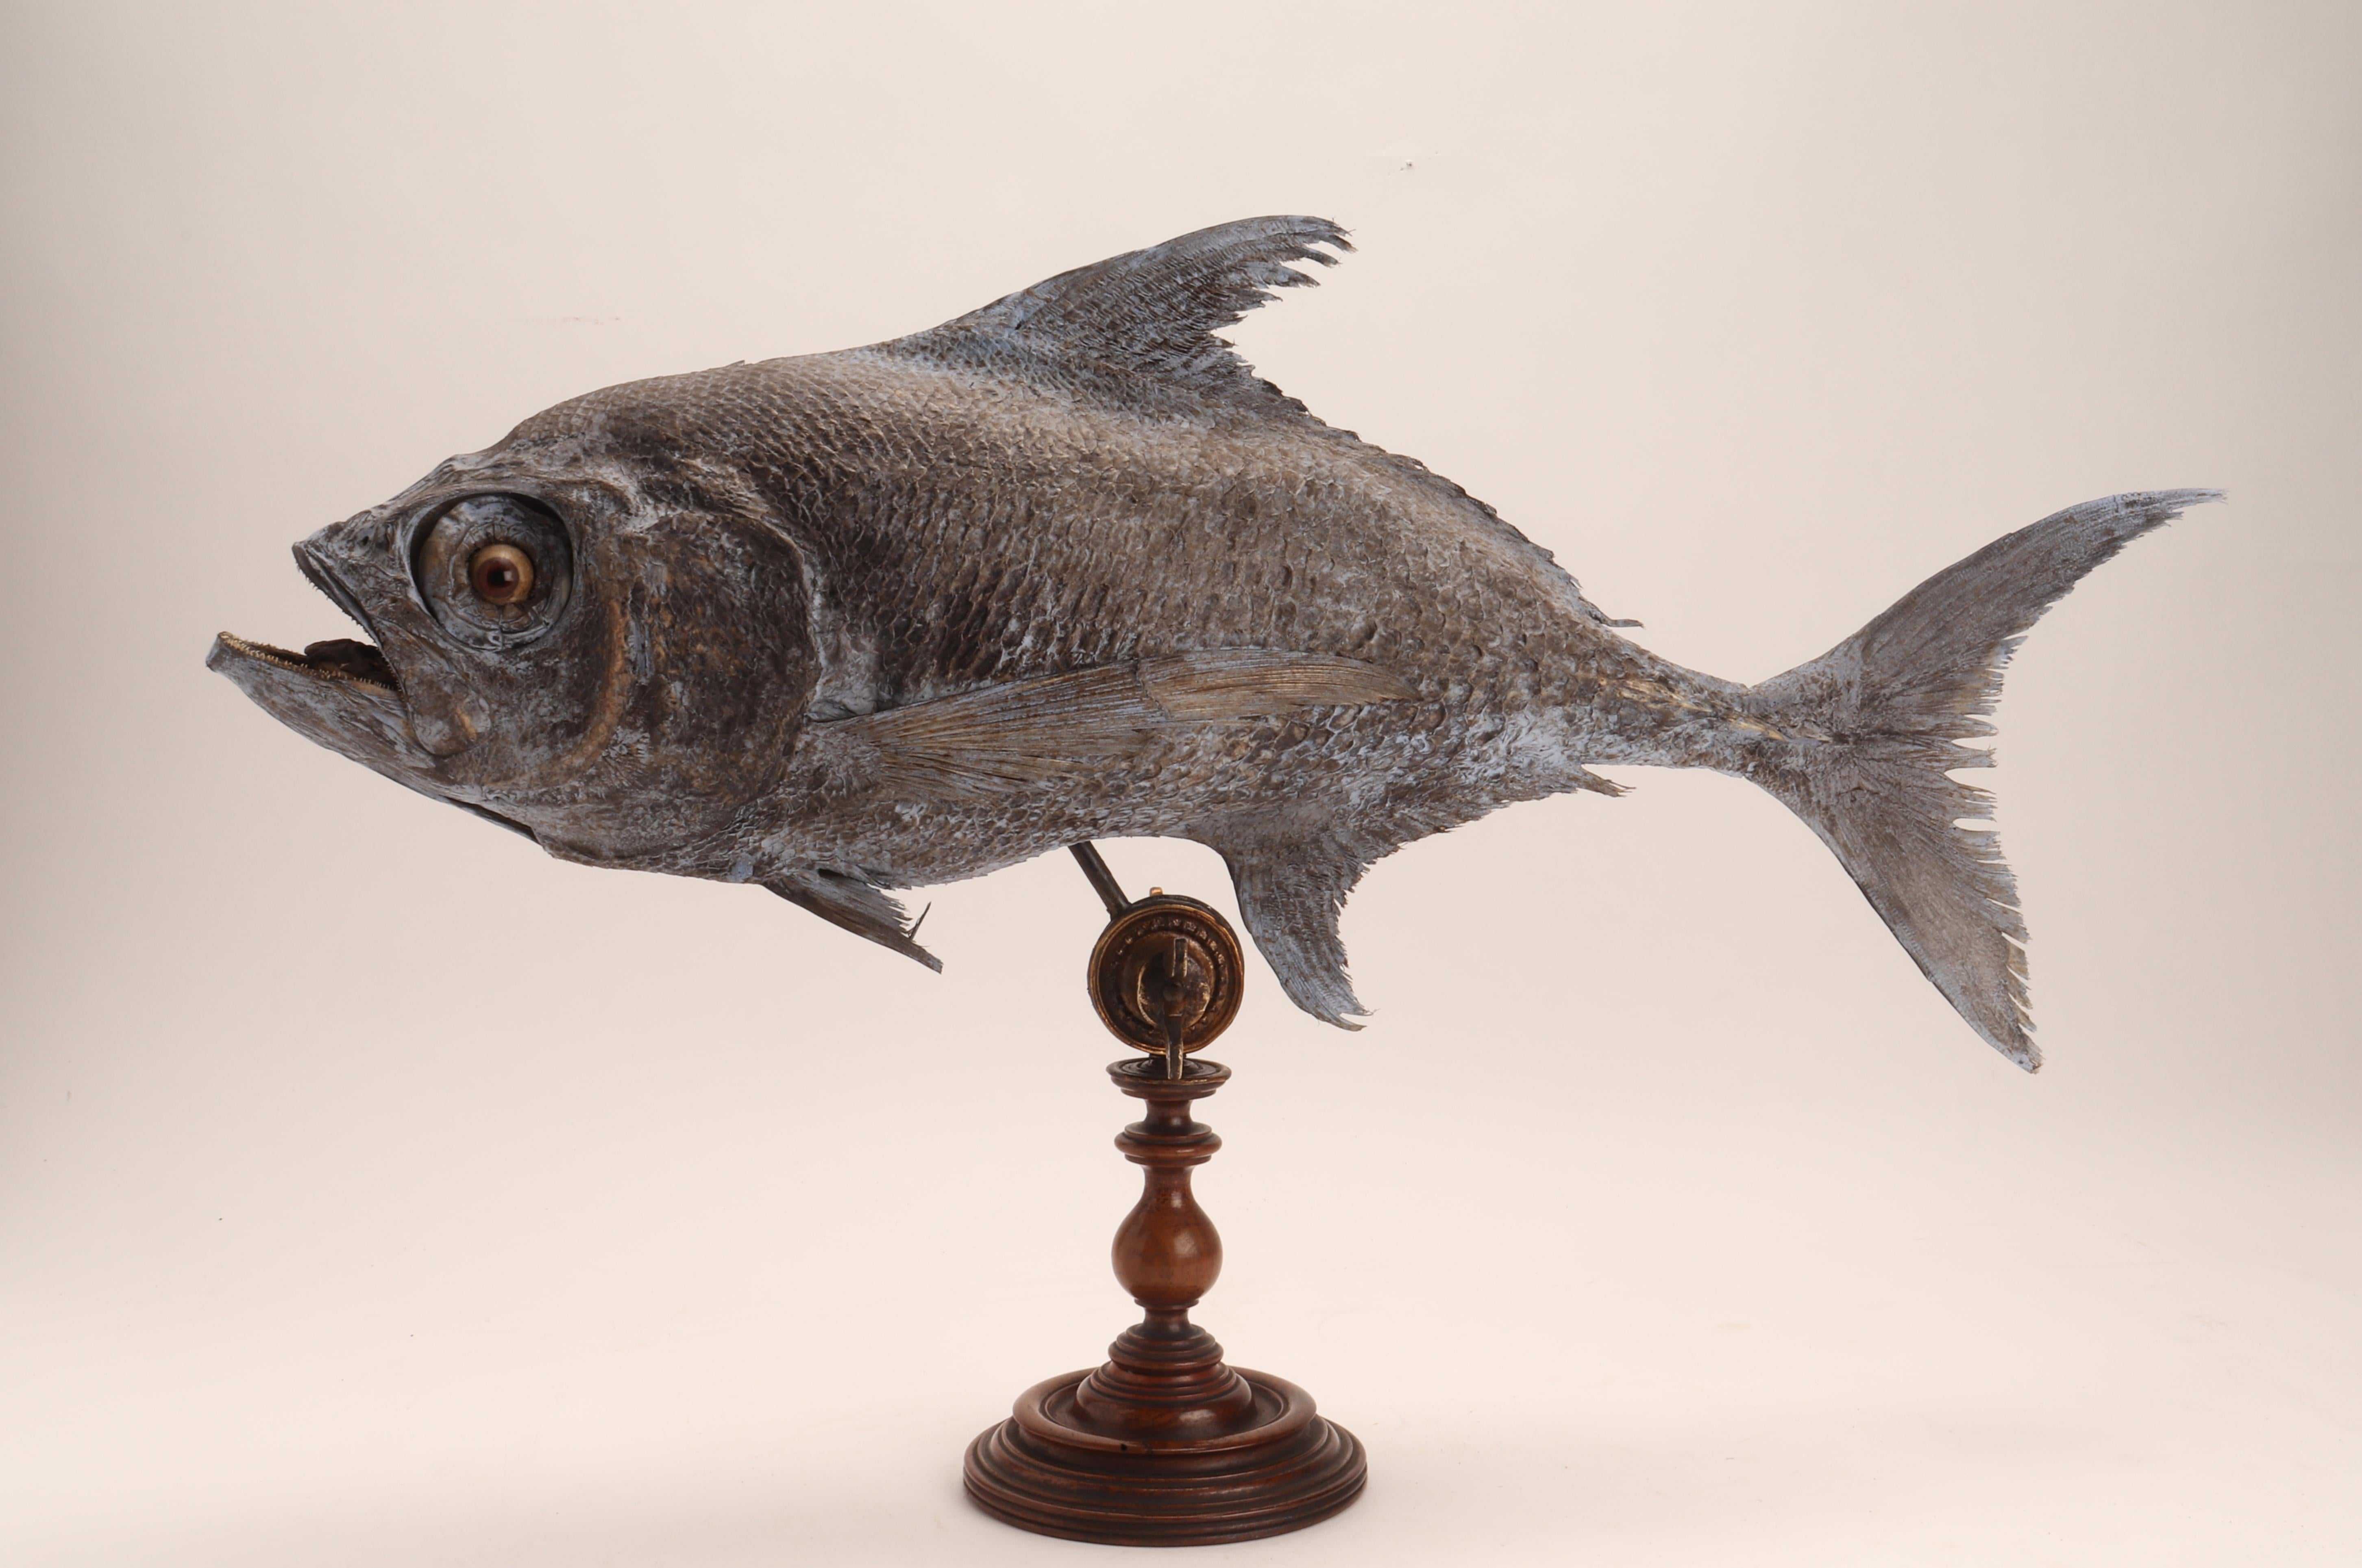 Taxidermy marine natural Wunderkammer specimen, embalmed sickle pomfret (Familia: Bramidae. Genus: Taractes. Species: Rubescens). The Specimen is stuffed and mounted over a laquered wooden base with brass joint to adjust the inclination, gray color.